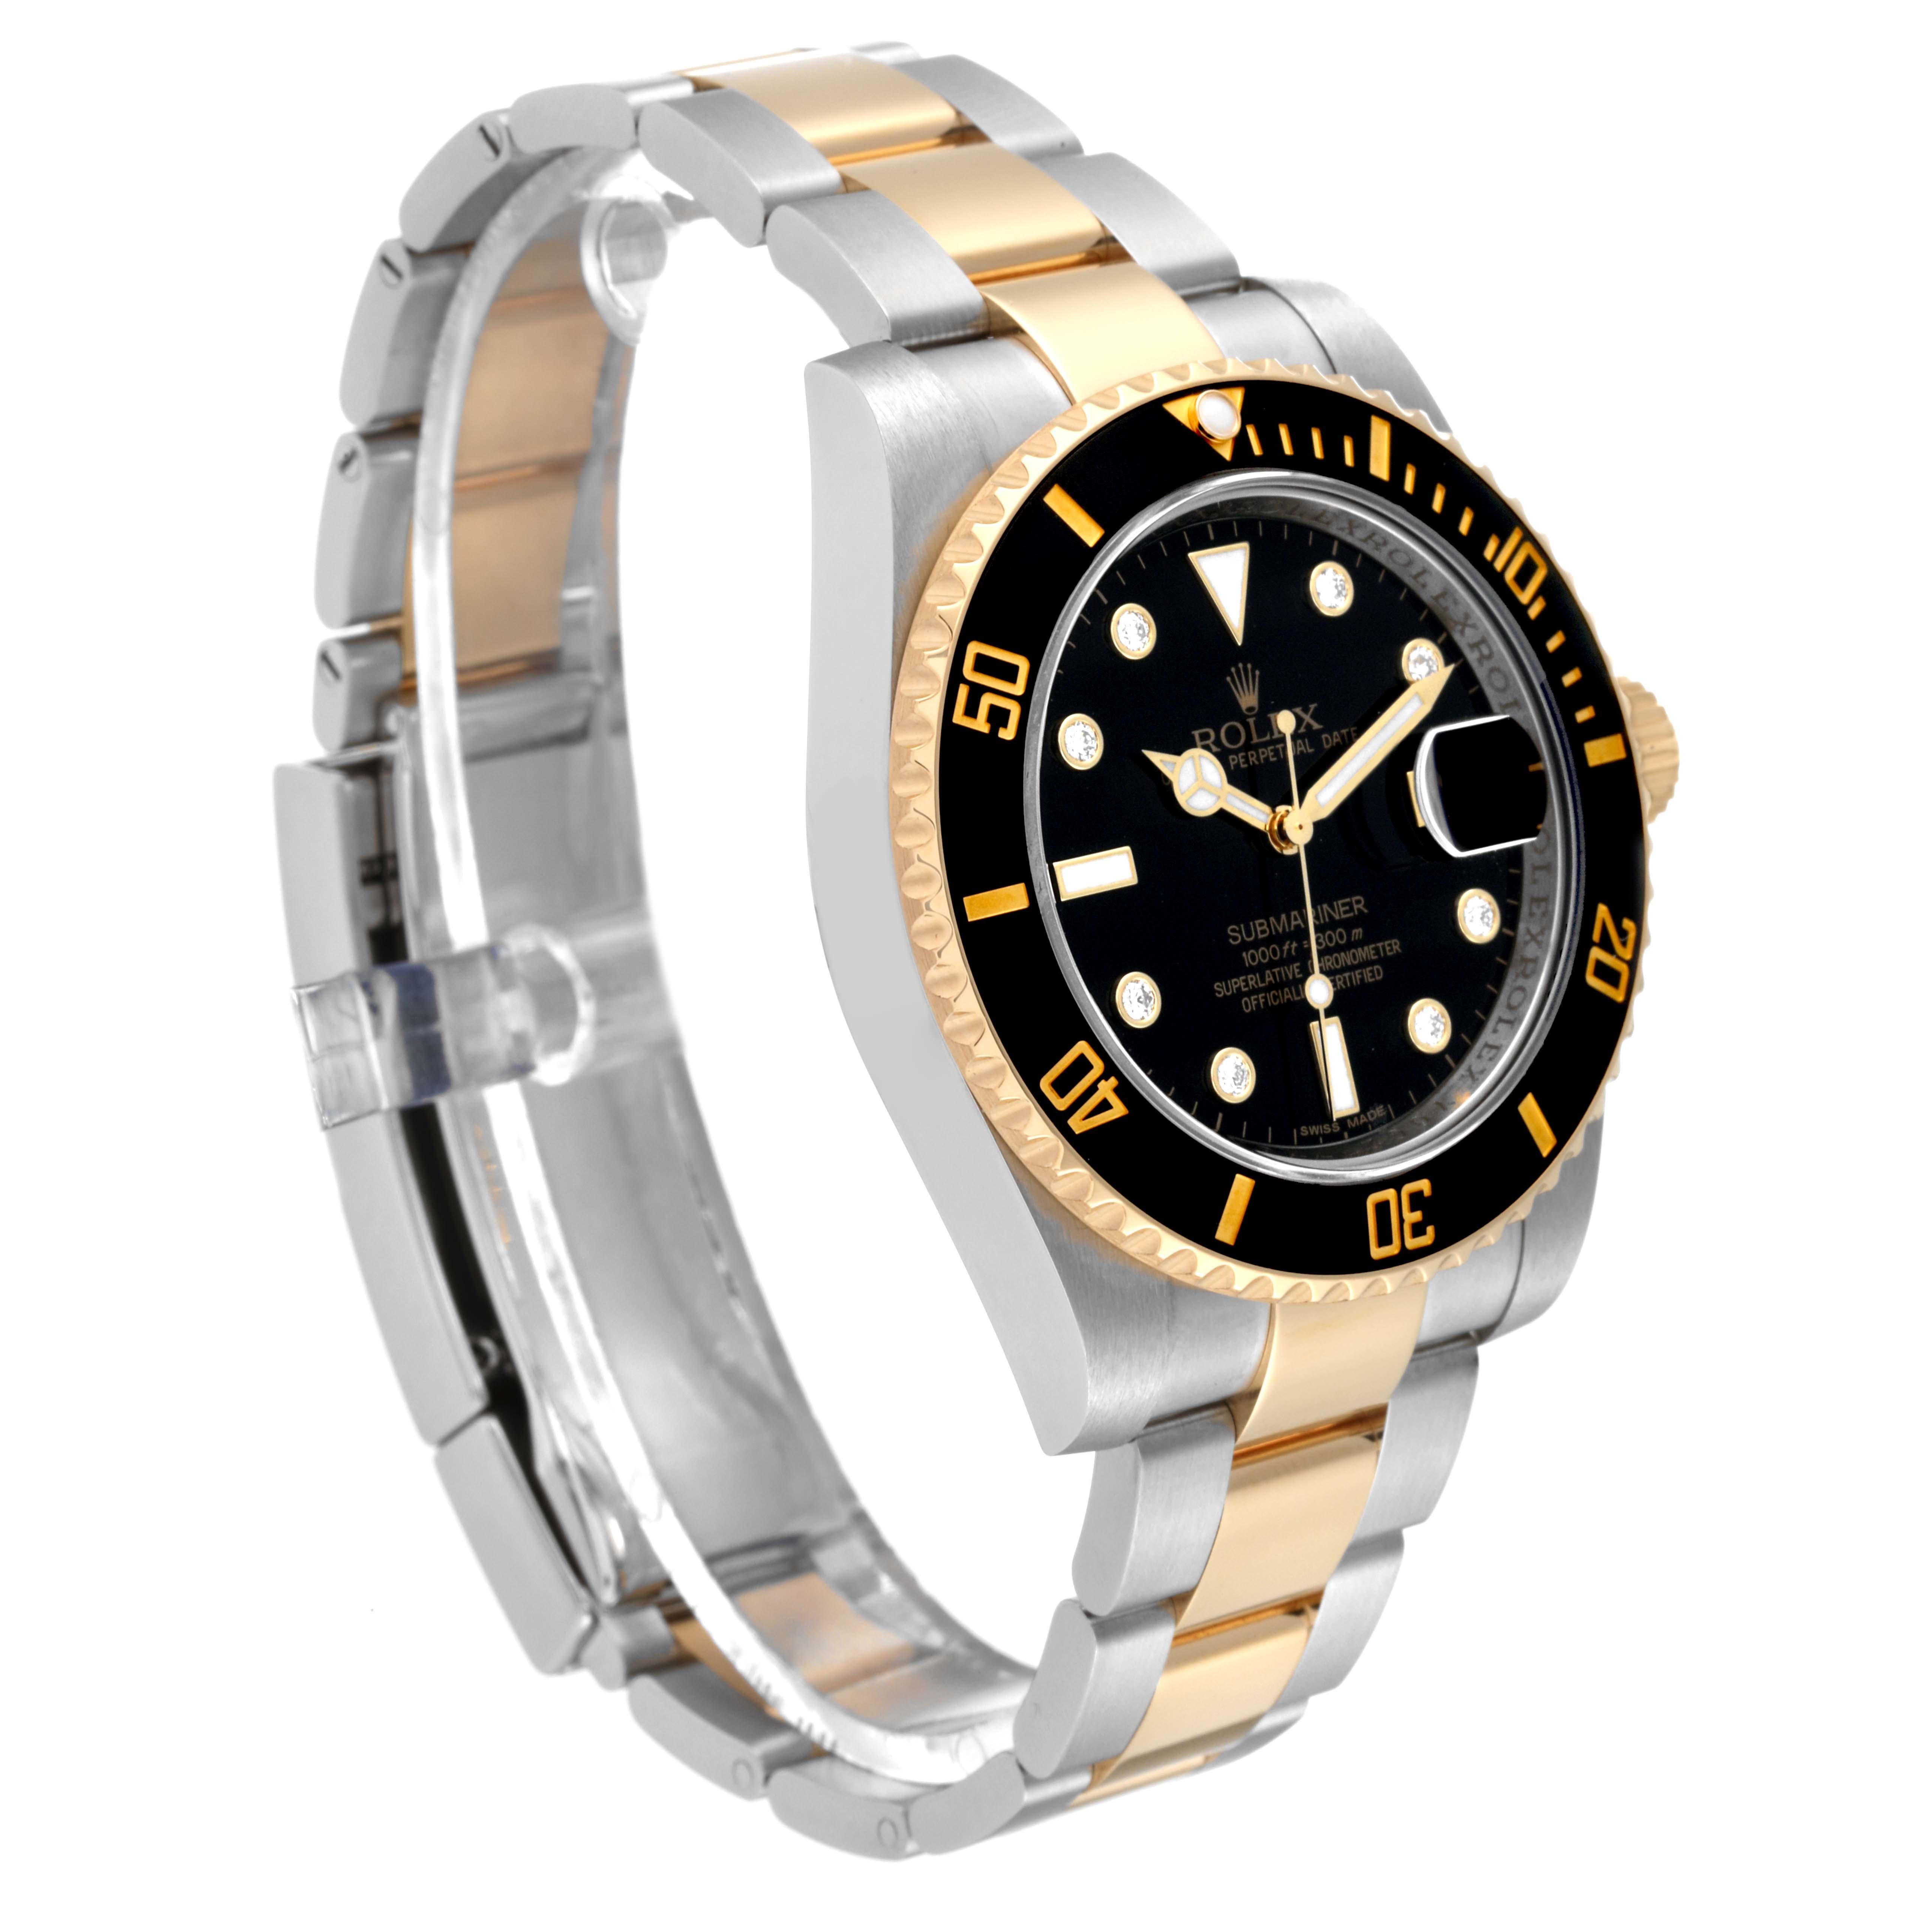 Rolex Submariner Steel Yellow Gold Black Diamond Dial Mens Watch 116613 Box Card For Sale 1